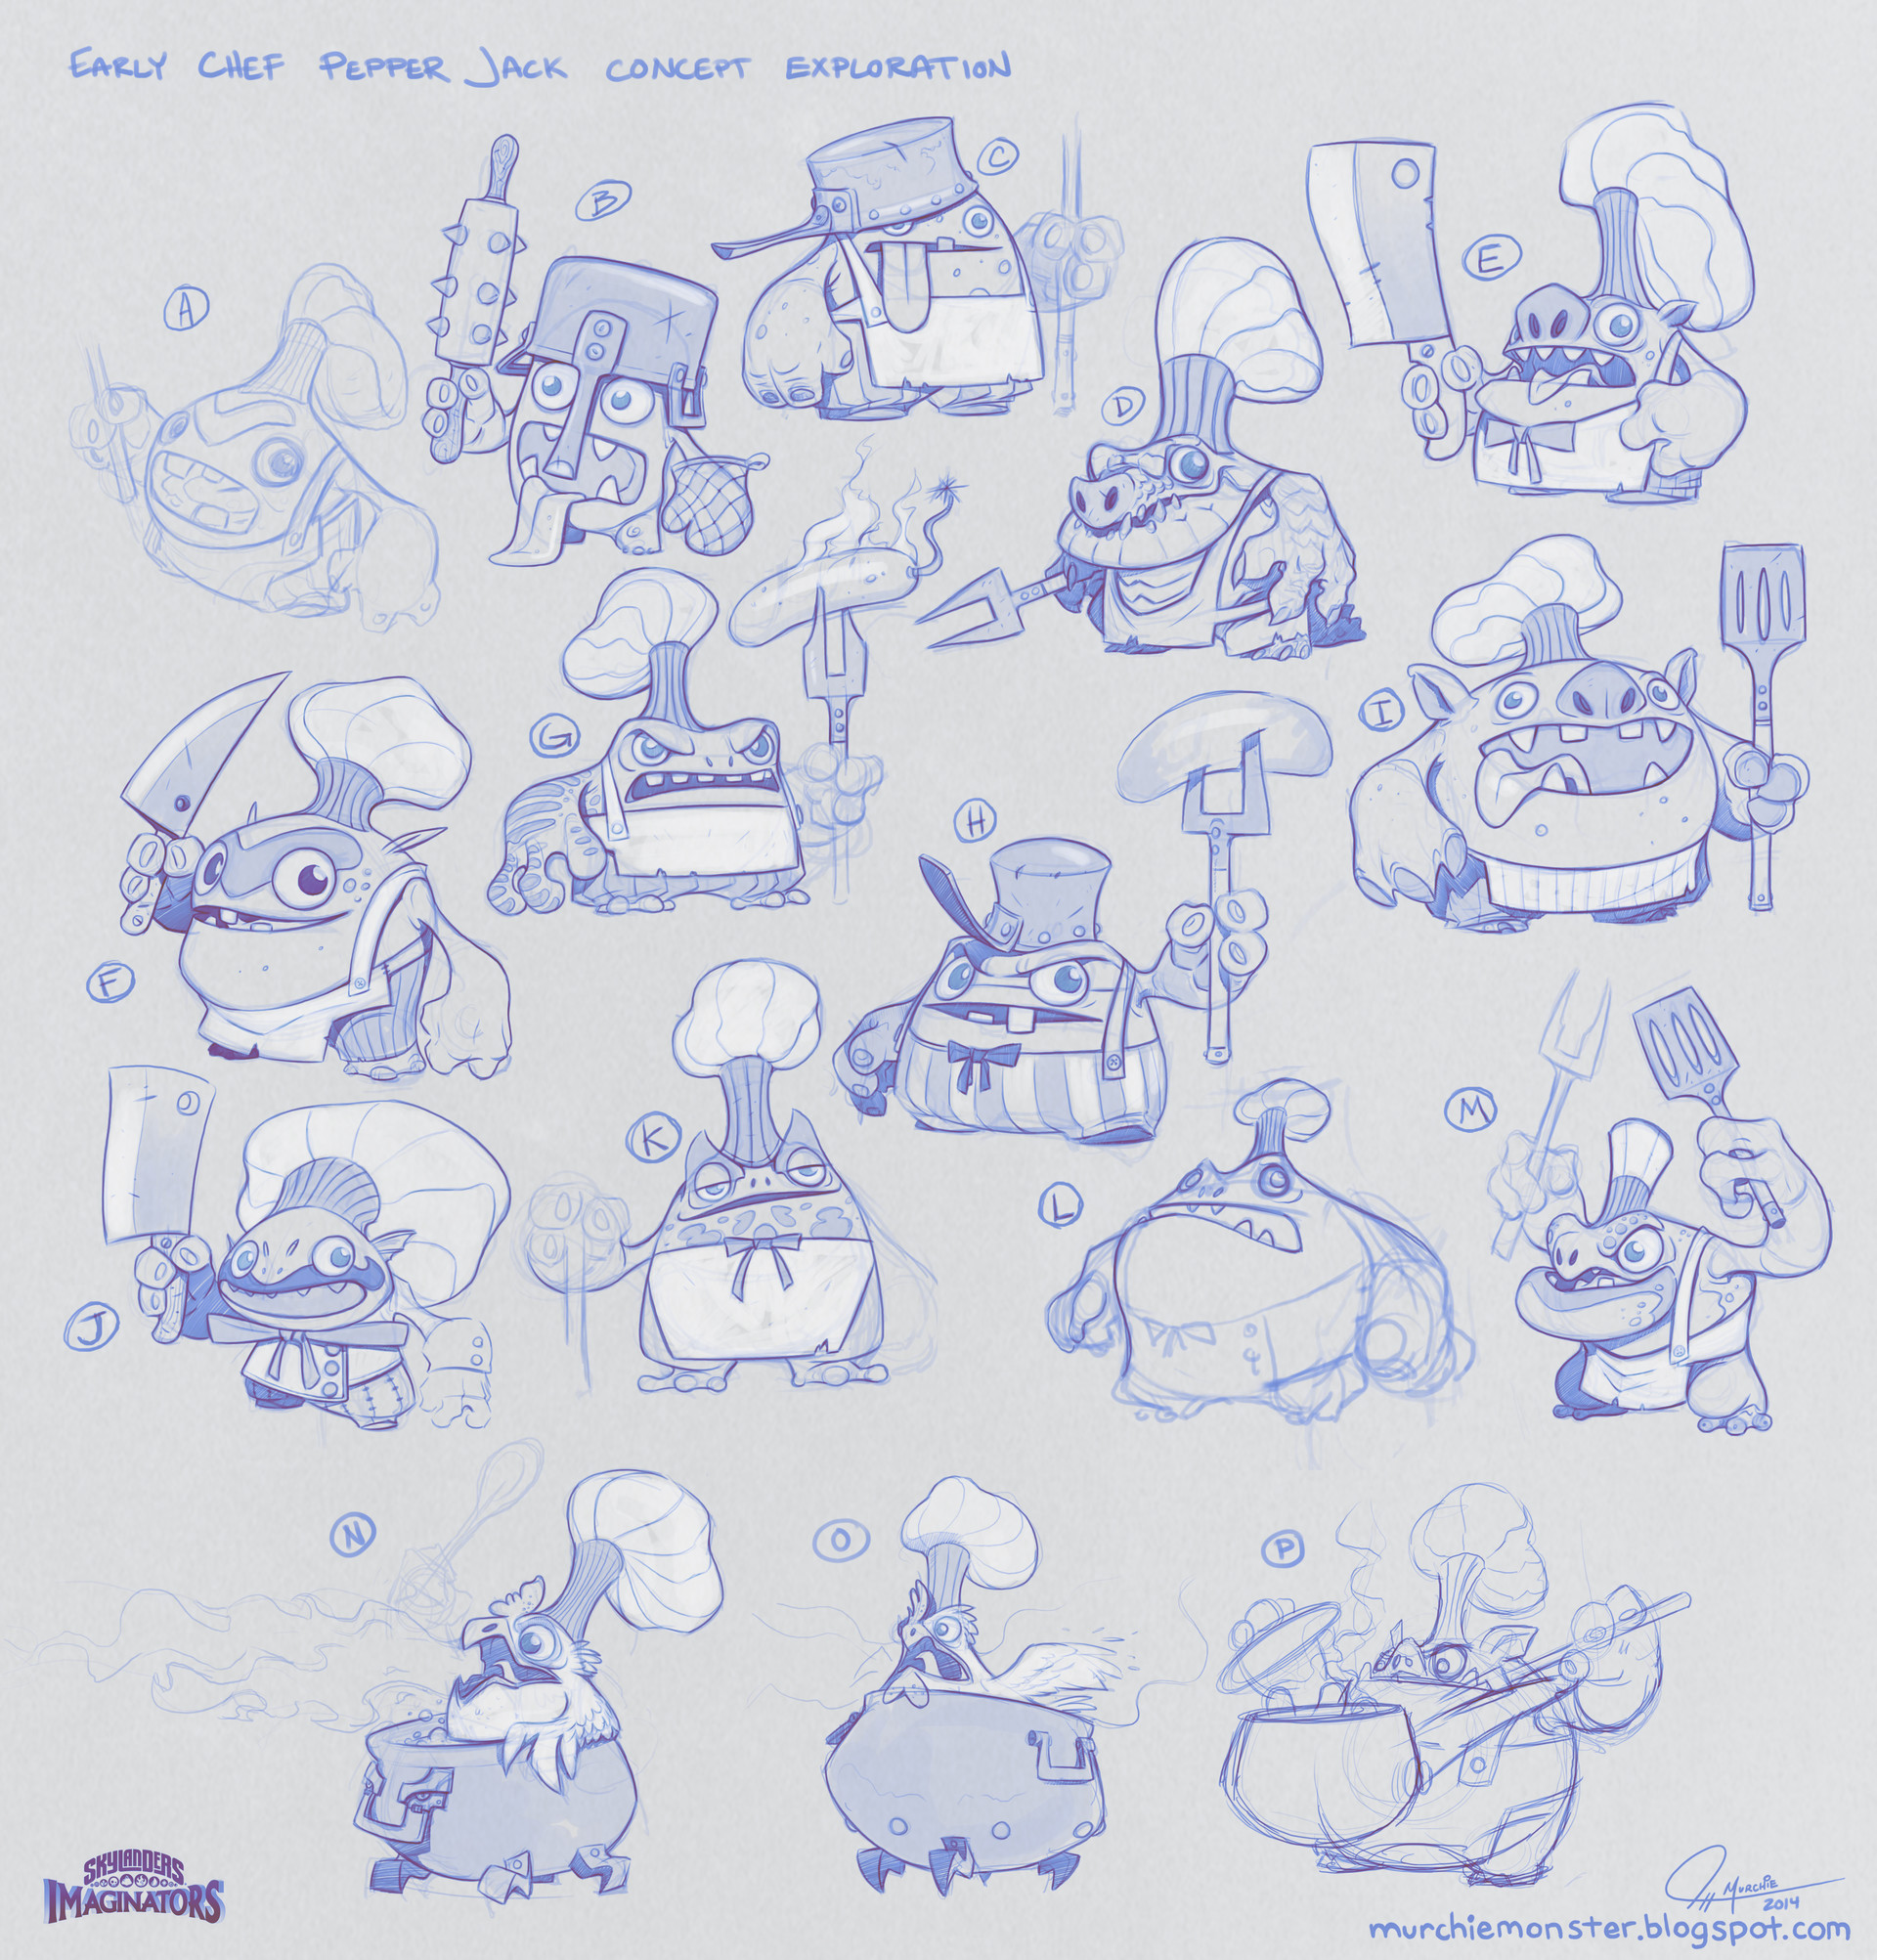 These are a bunch of Chef Pepper Jack concepts from the early development o...